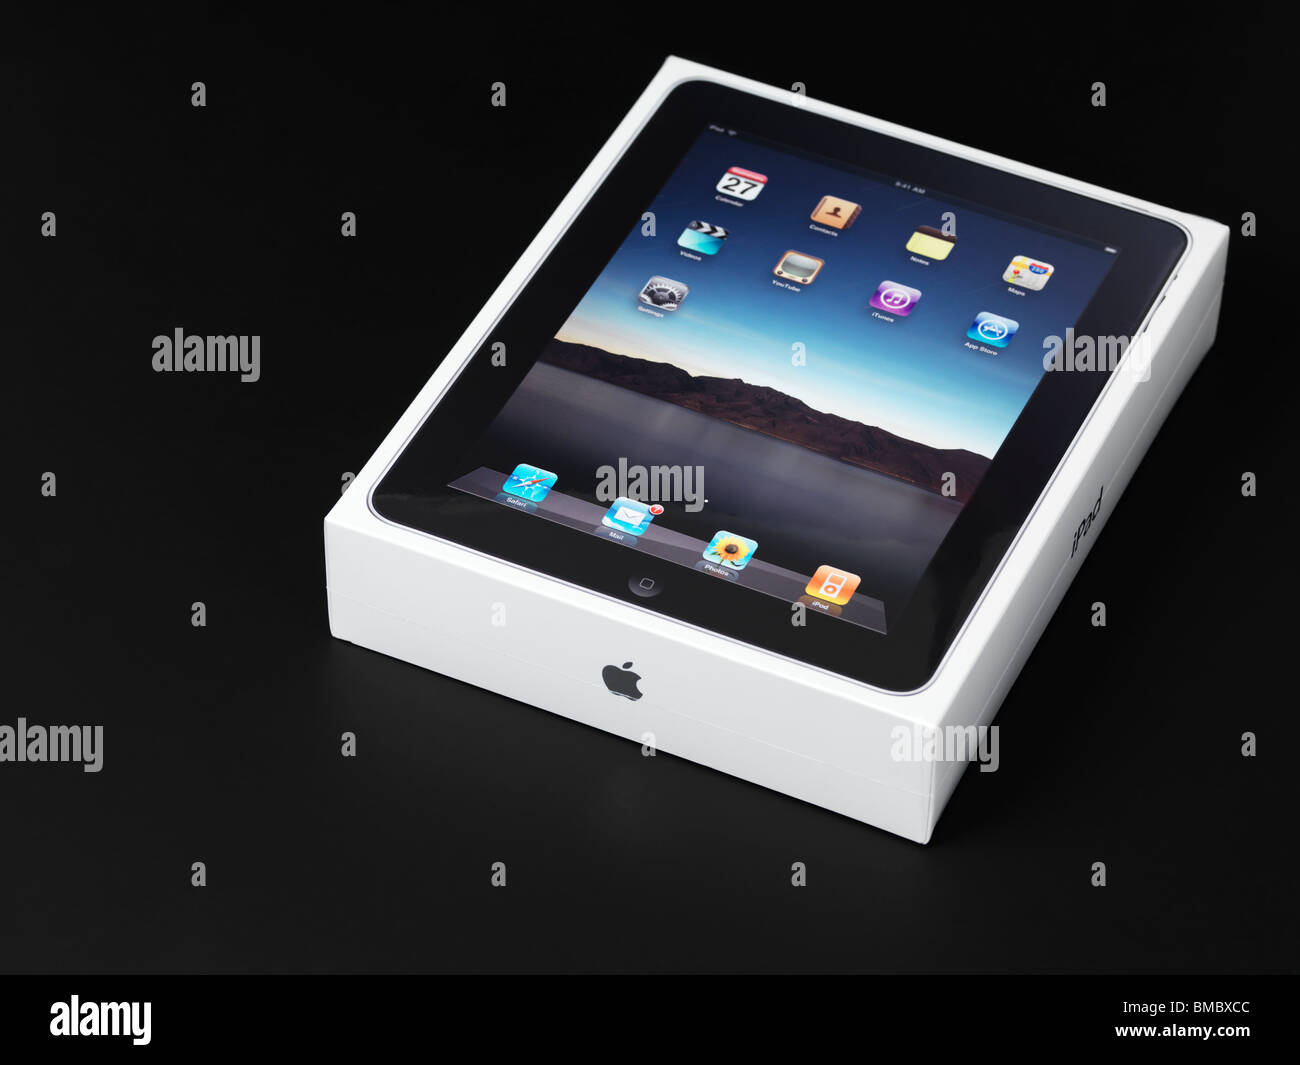 Apple iPad product packaging boxed and wrapped in plastic. Isolated on black background. Stock Photo